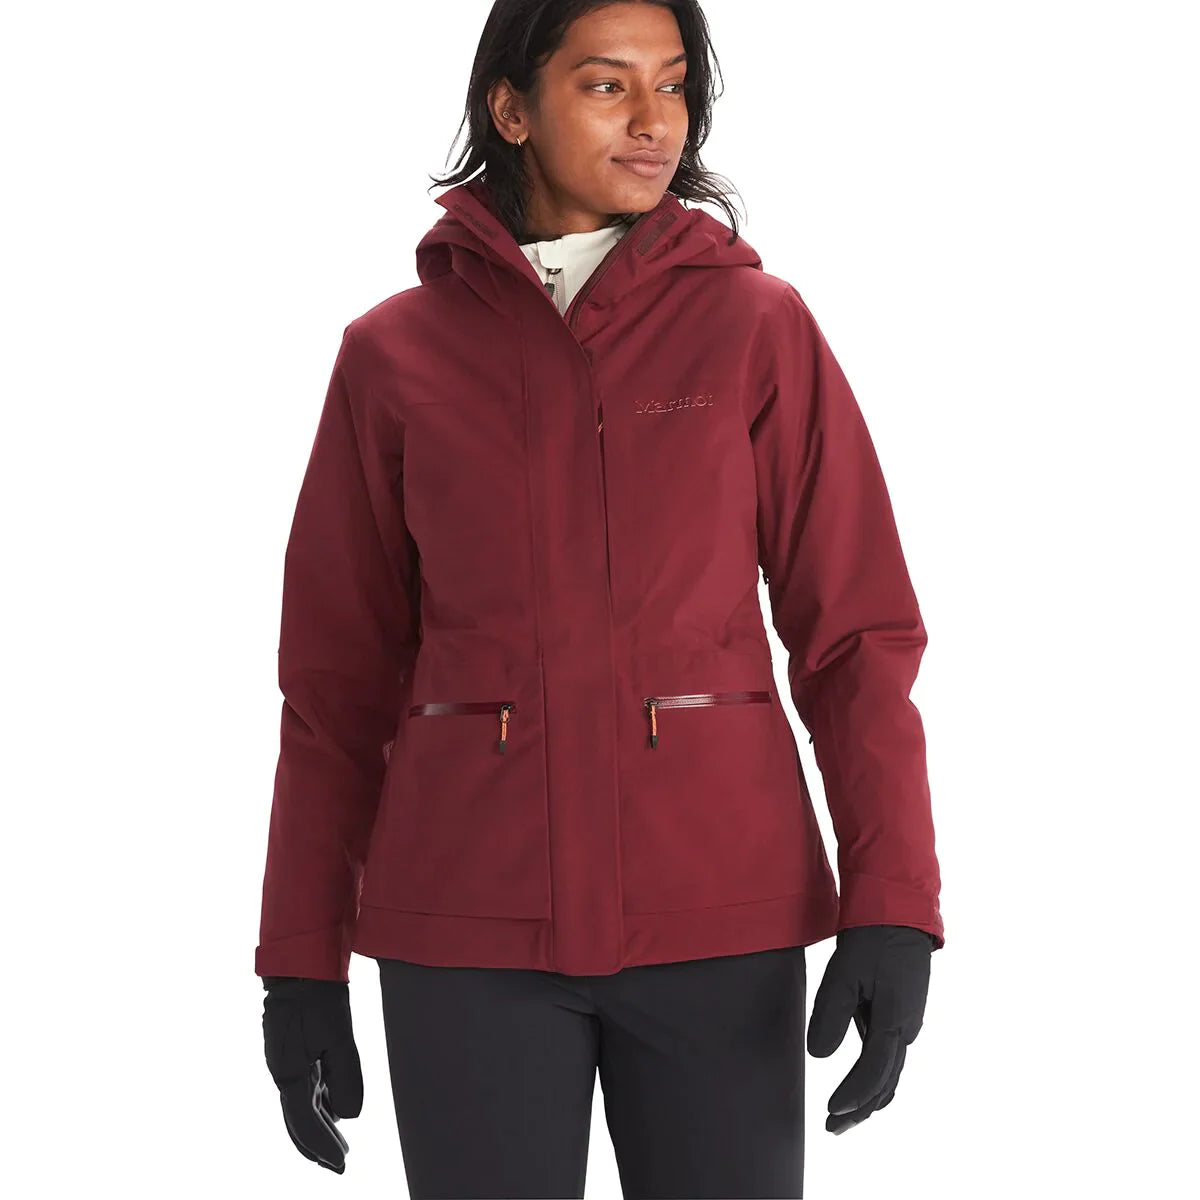 Women's Wine colored, relaxed fit winter jacket. Water resistant and reinforced zippers